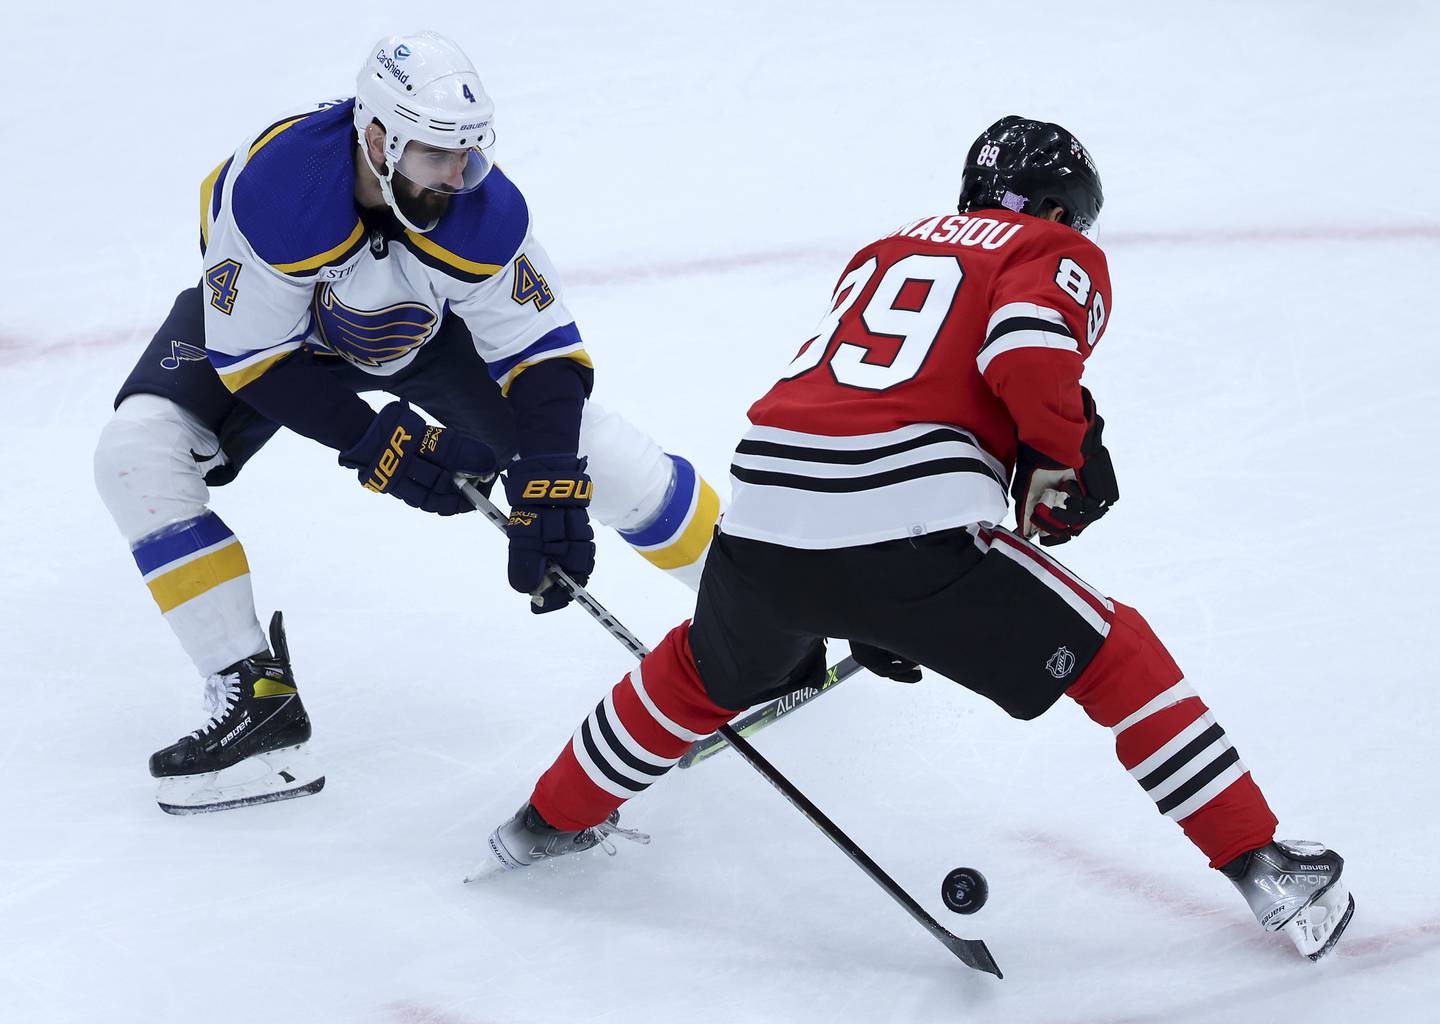 Blues defenseman Nick Leddy takes the puck away from Blackhawks center Andreas Athanasiou in the second period on Nov. 16, 2022.